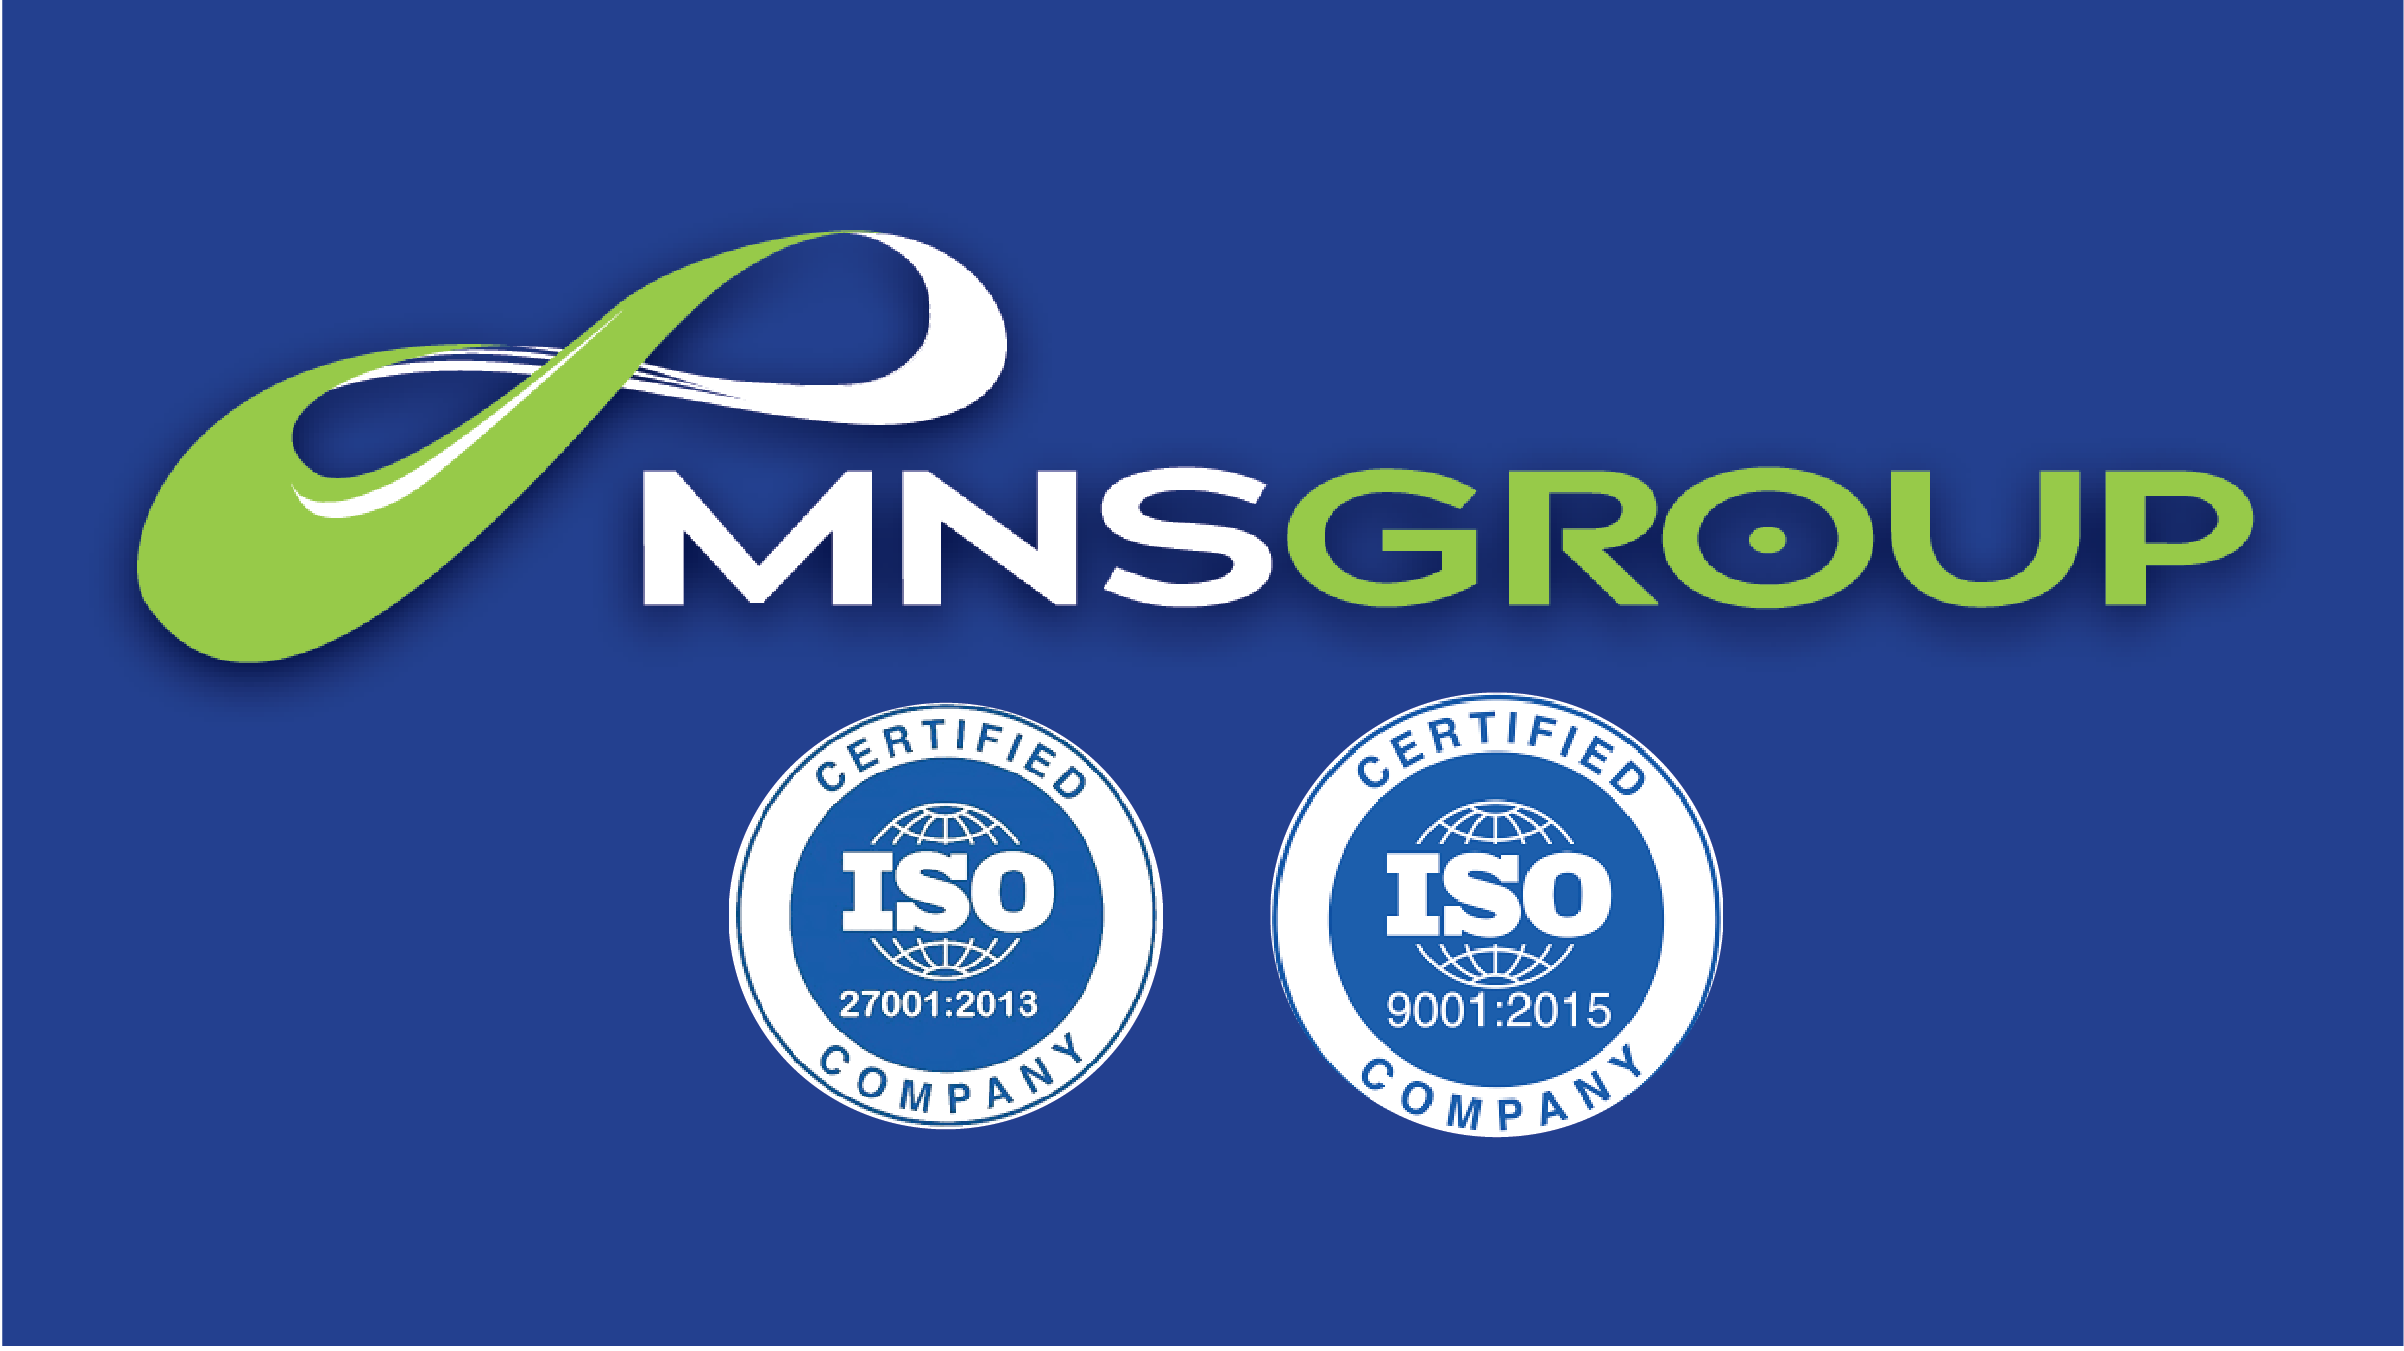 MNS Group Achieves ISO 27001 Information Security and ISO 9001 Quality Management Certification